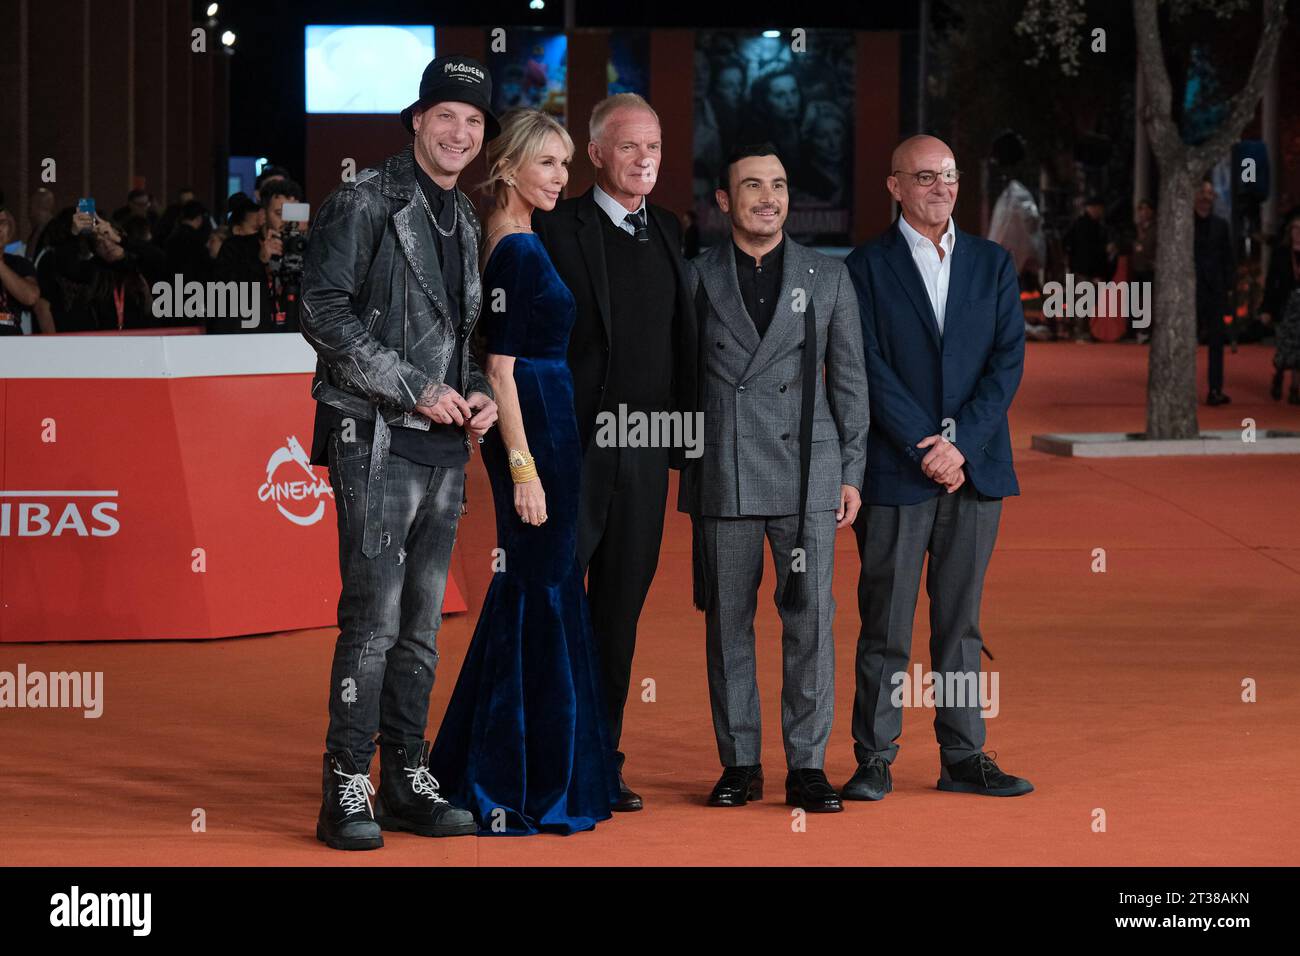 Rome, Italy. 23rd Oct, 2023. (L to R) Clementino, Trudie Styler, Sting, Francesco Di Leva and Don Antonio Loffredo attend a red carpet for the movie 'Posso entrare? An ode to Naples' during the 18th Rome Film Festival at Auditorium Parco Della Musica in Rome. Credit: SOPA Images Limited/Alamy Live News Stock Photo